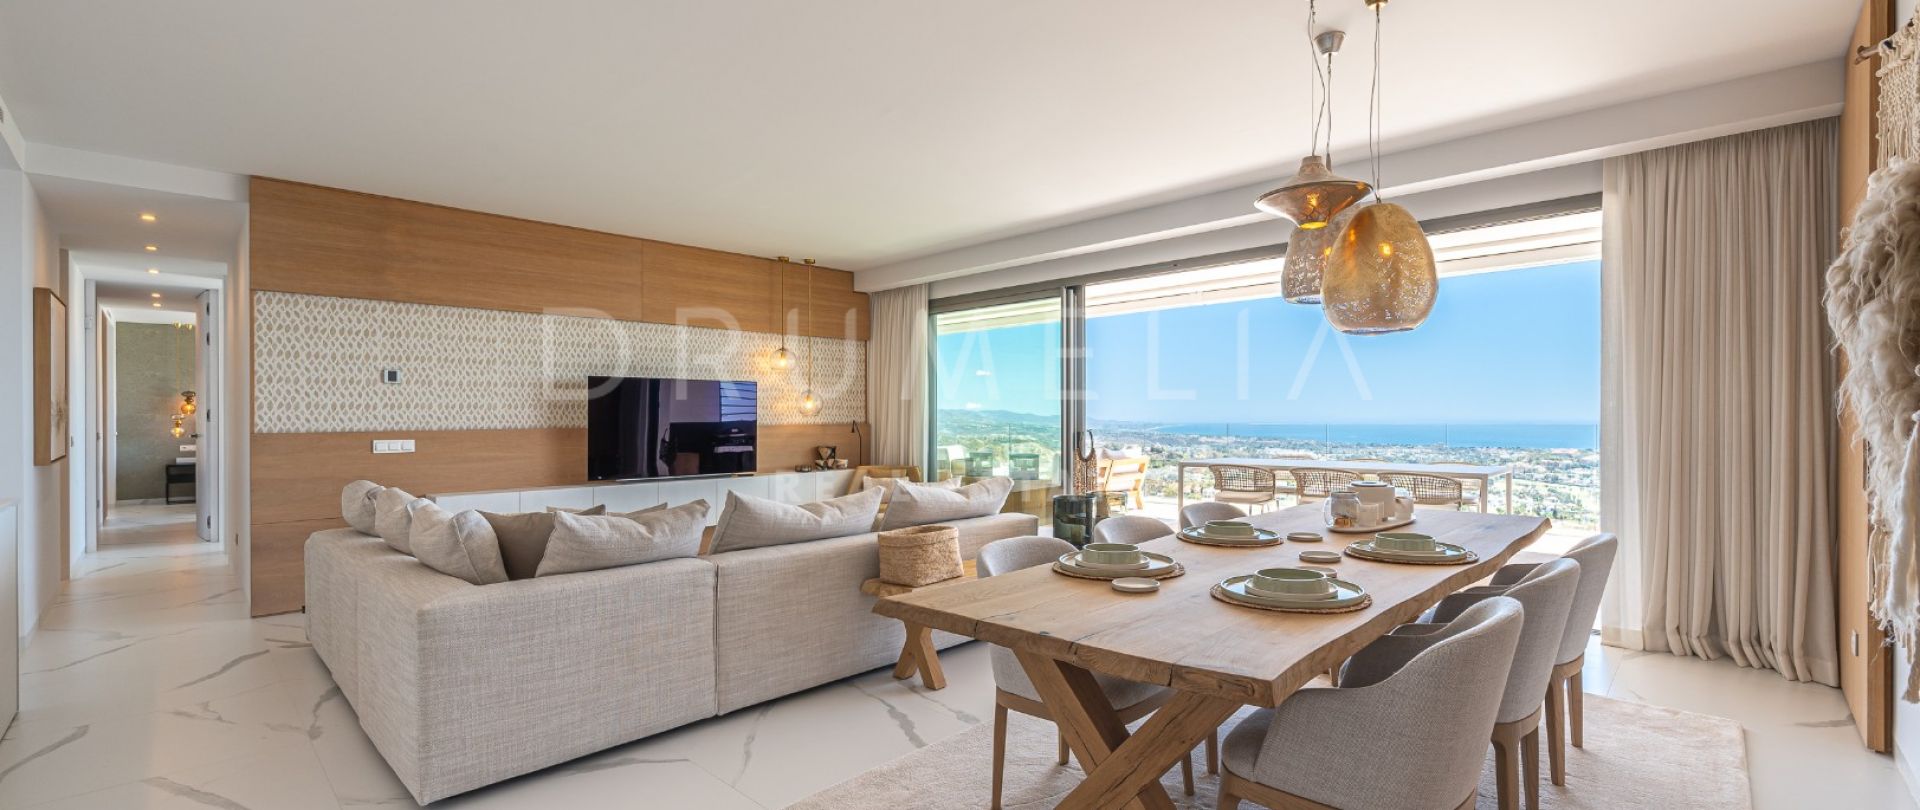 Fabulous brand-new modern luxury apartment with panoramic views in boutique complex in Benahavis.